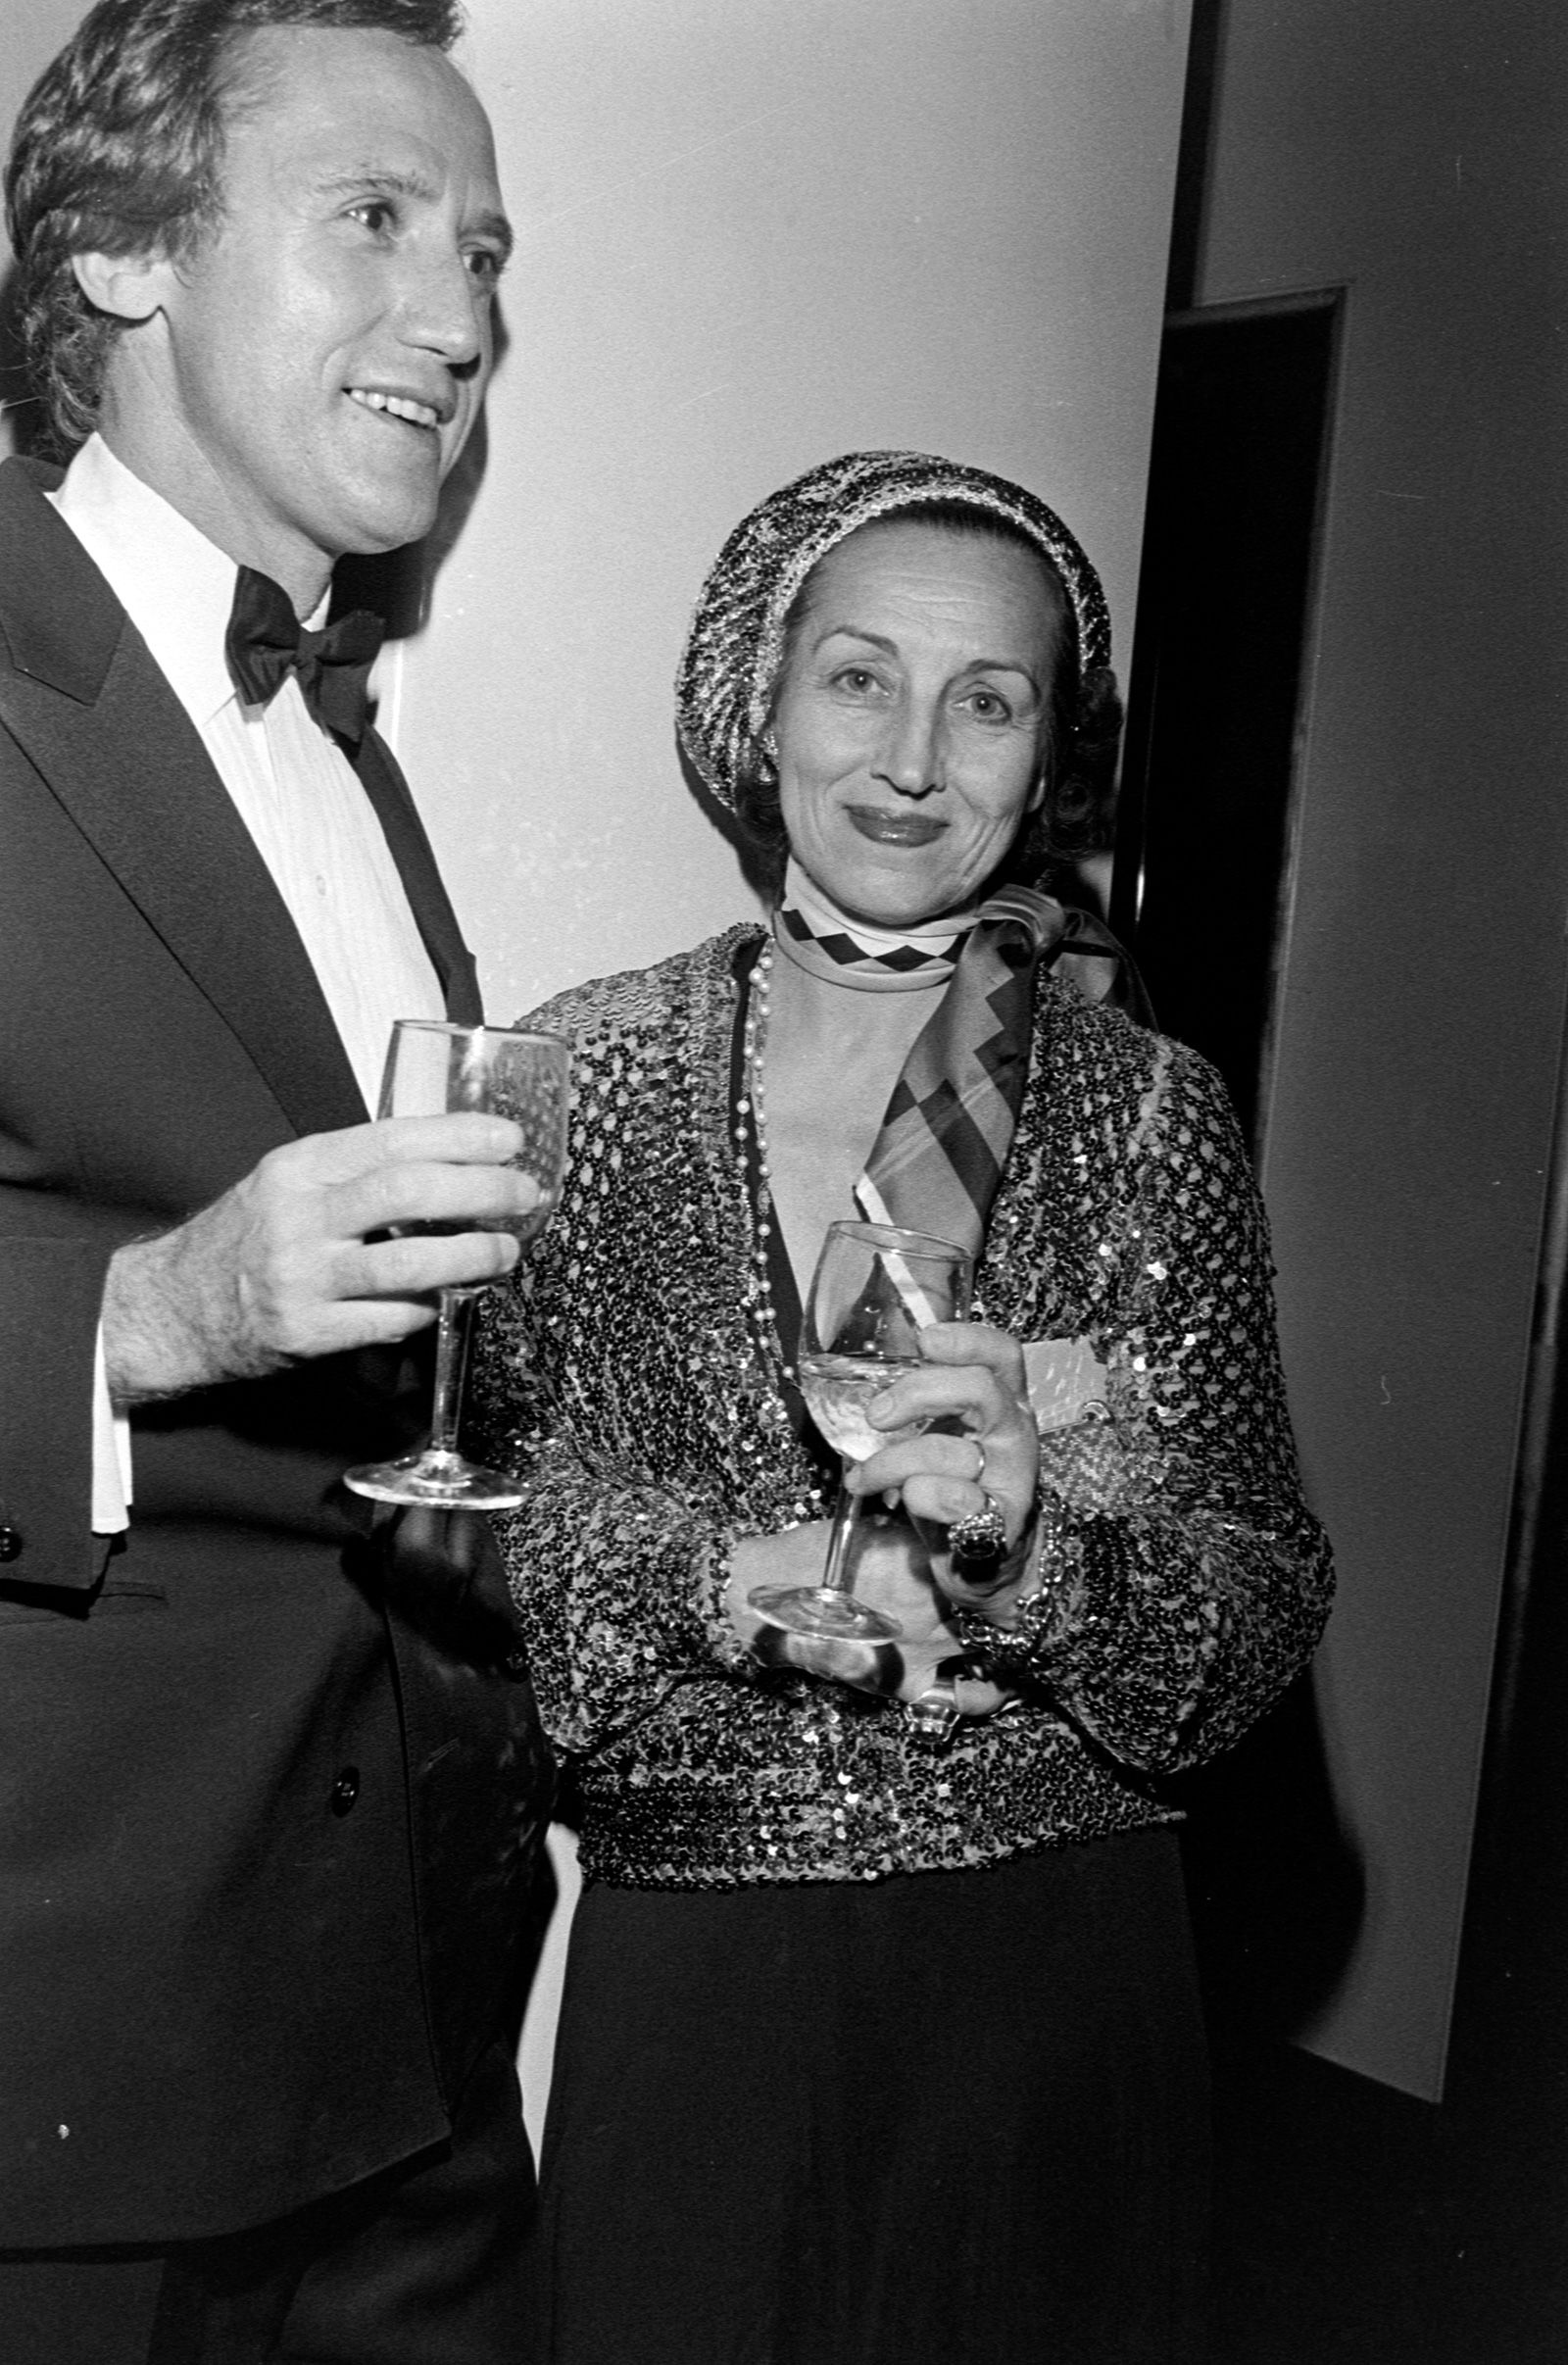 Francoise Gilot Salk (R) attends a party at Mr. Chow's, a restaurant in New York City, on October 15, 1980. (Photo by John Bright/WWD/Penske Media via Getty Images)